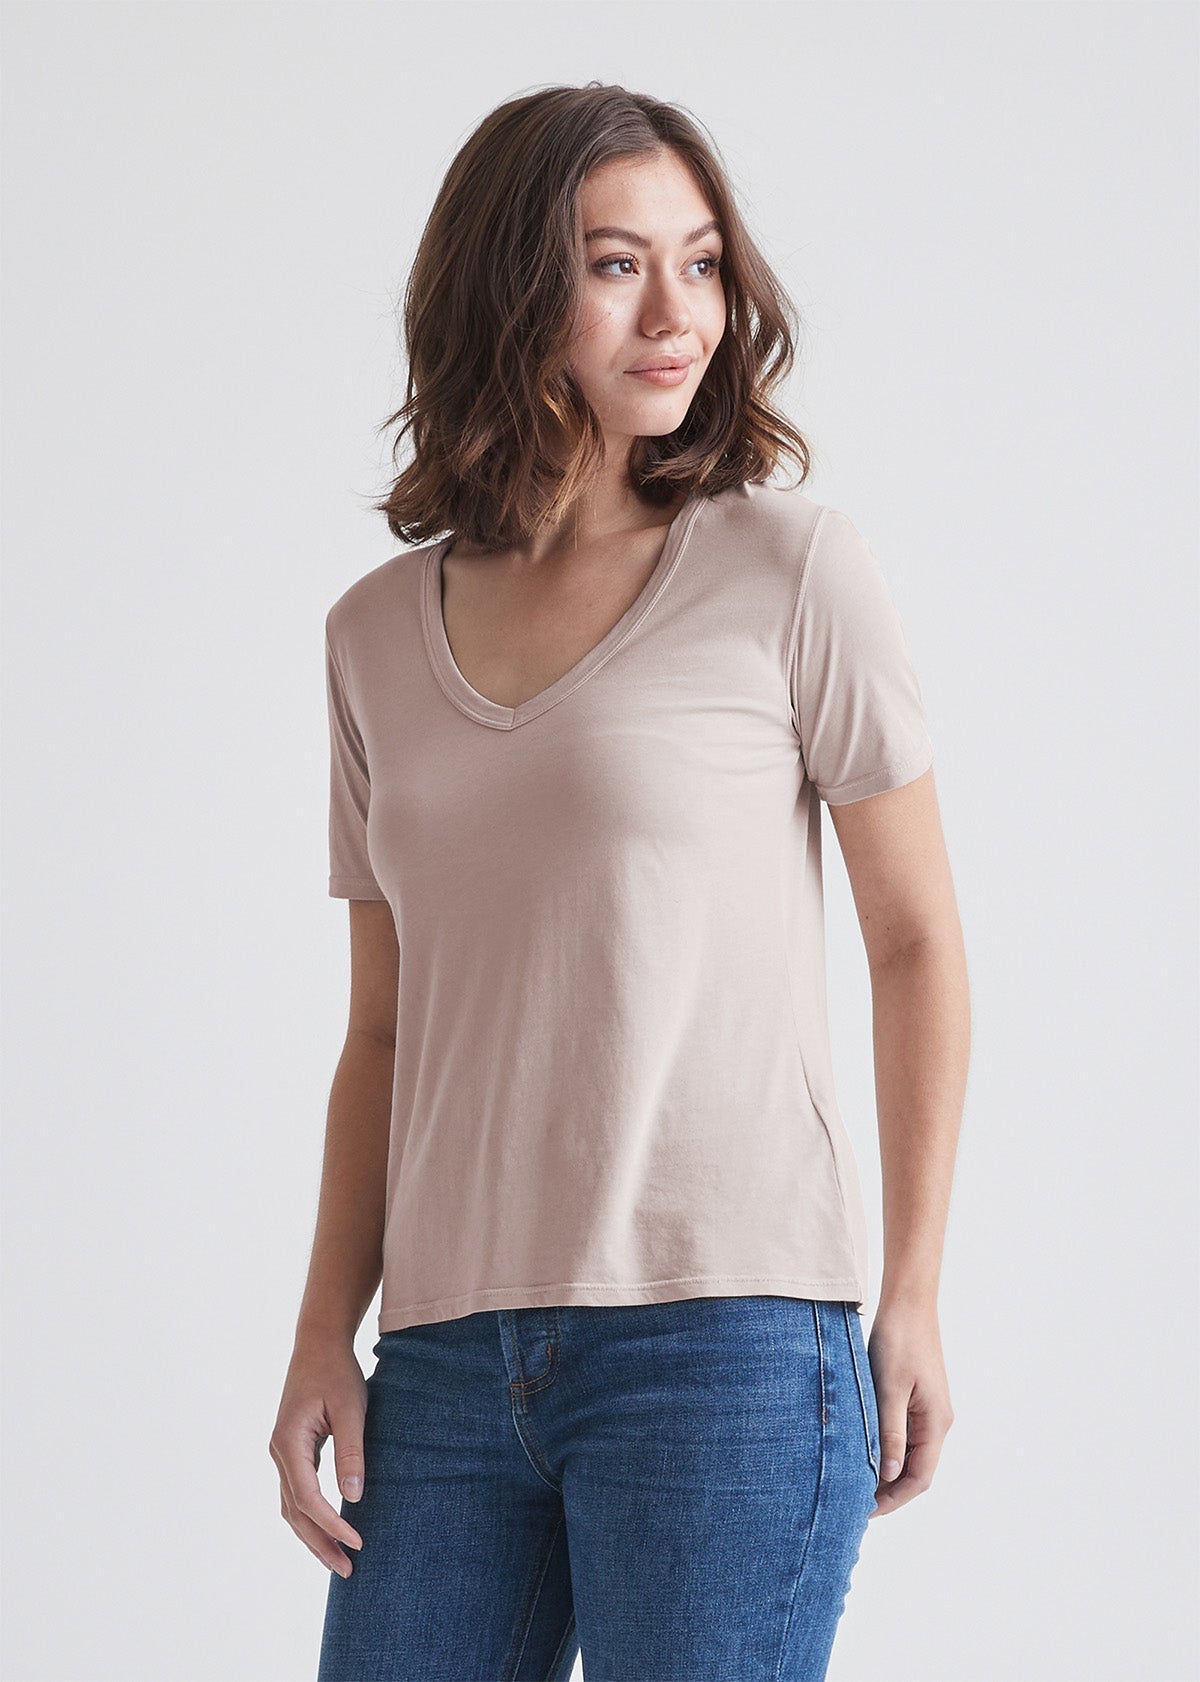 Xersion NWOT Everair Women's Short Sleeve Essential Performance Tee Size  XXL Multiple - $14 (36% Off Retail) - From Leah